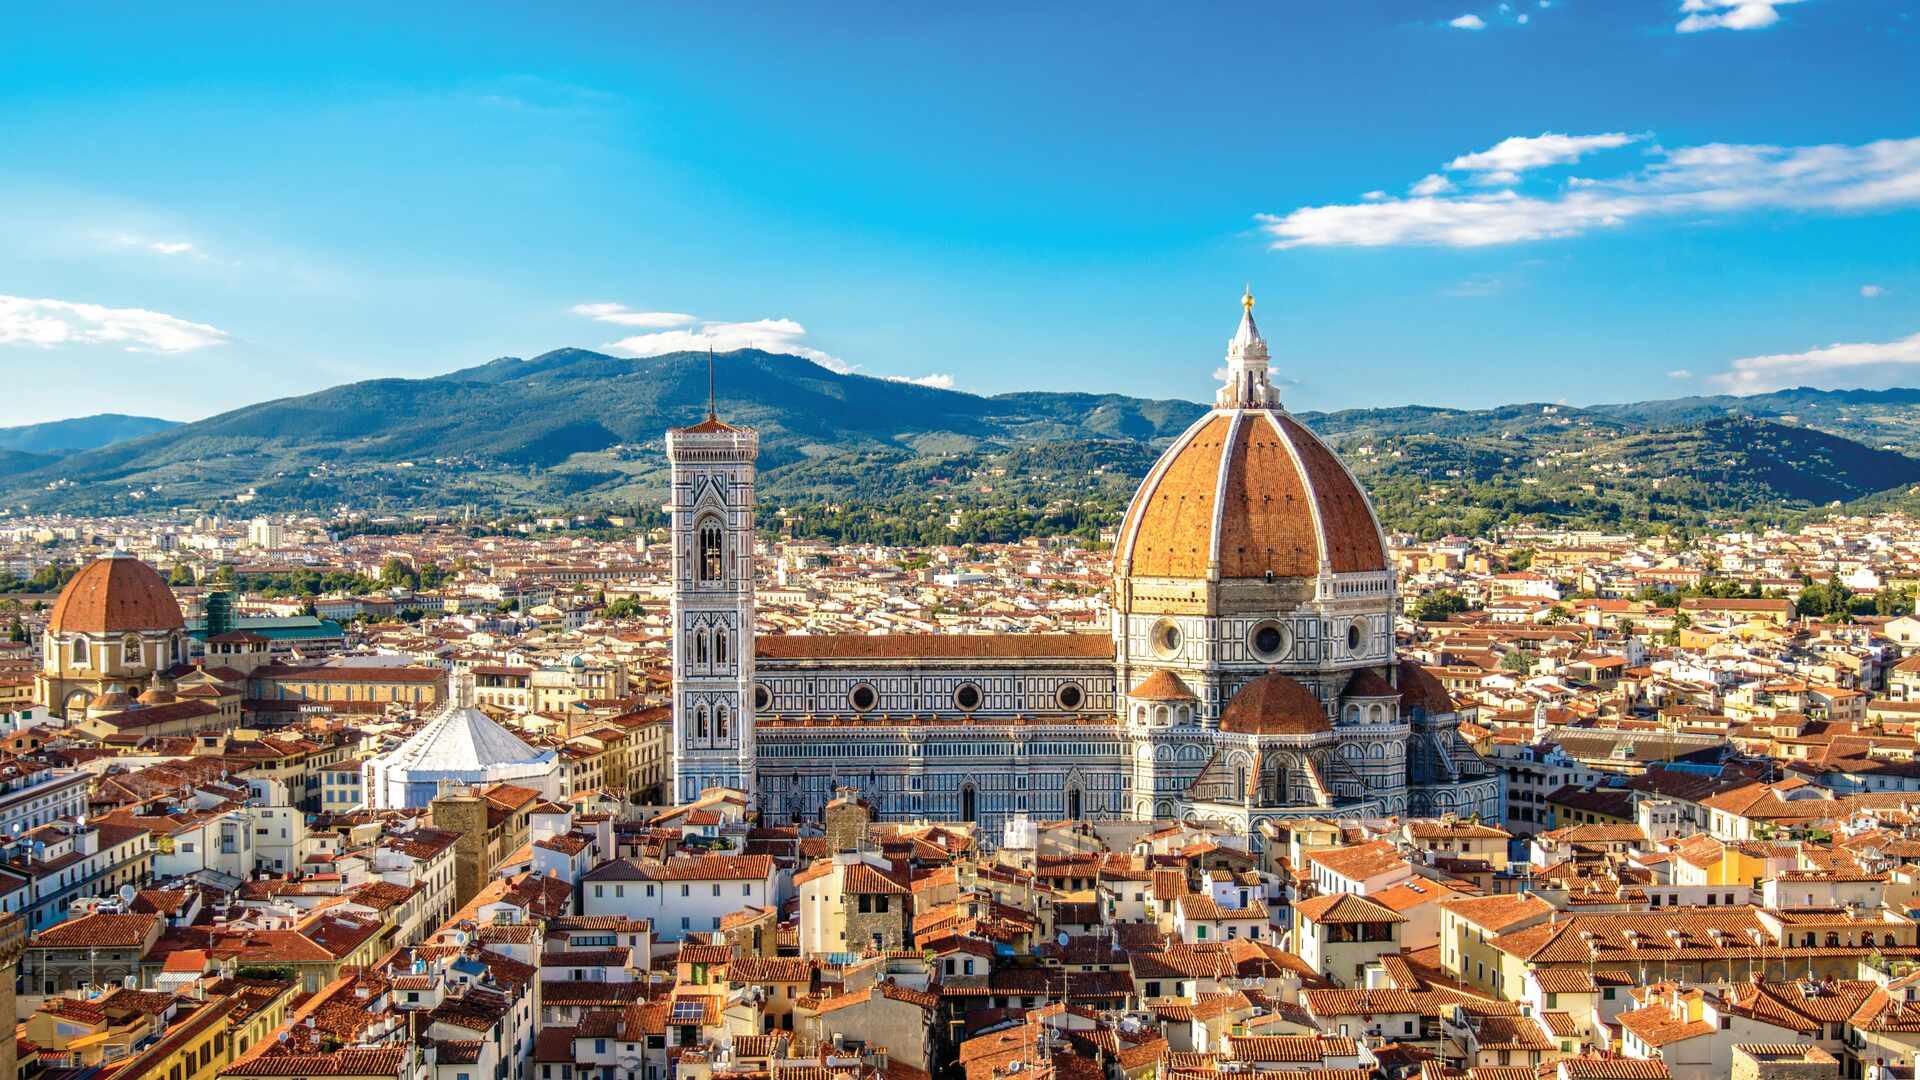 View of the Santa Maria del Fiore cathedral in Florence, Italy